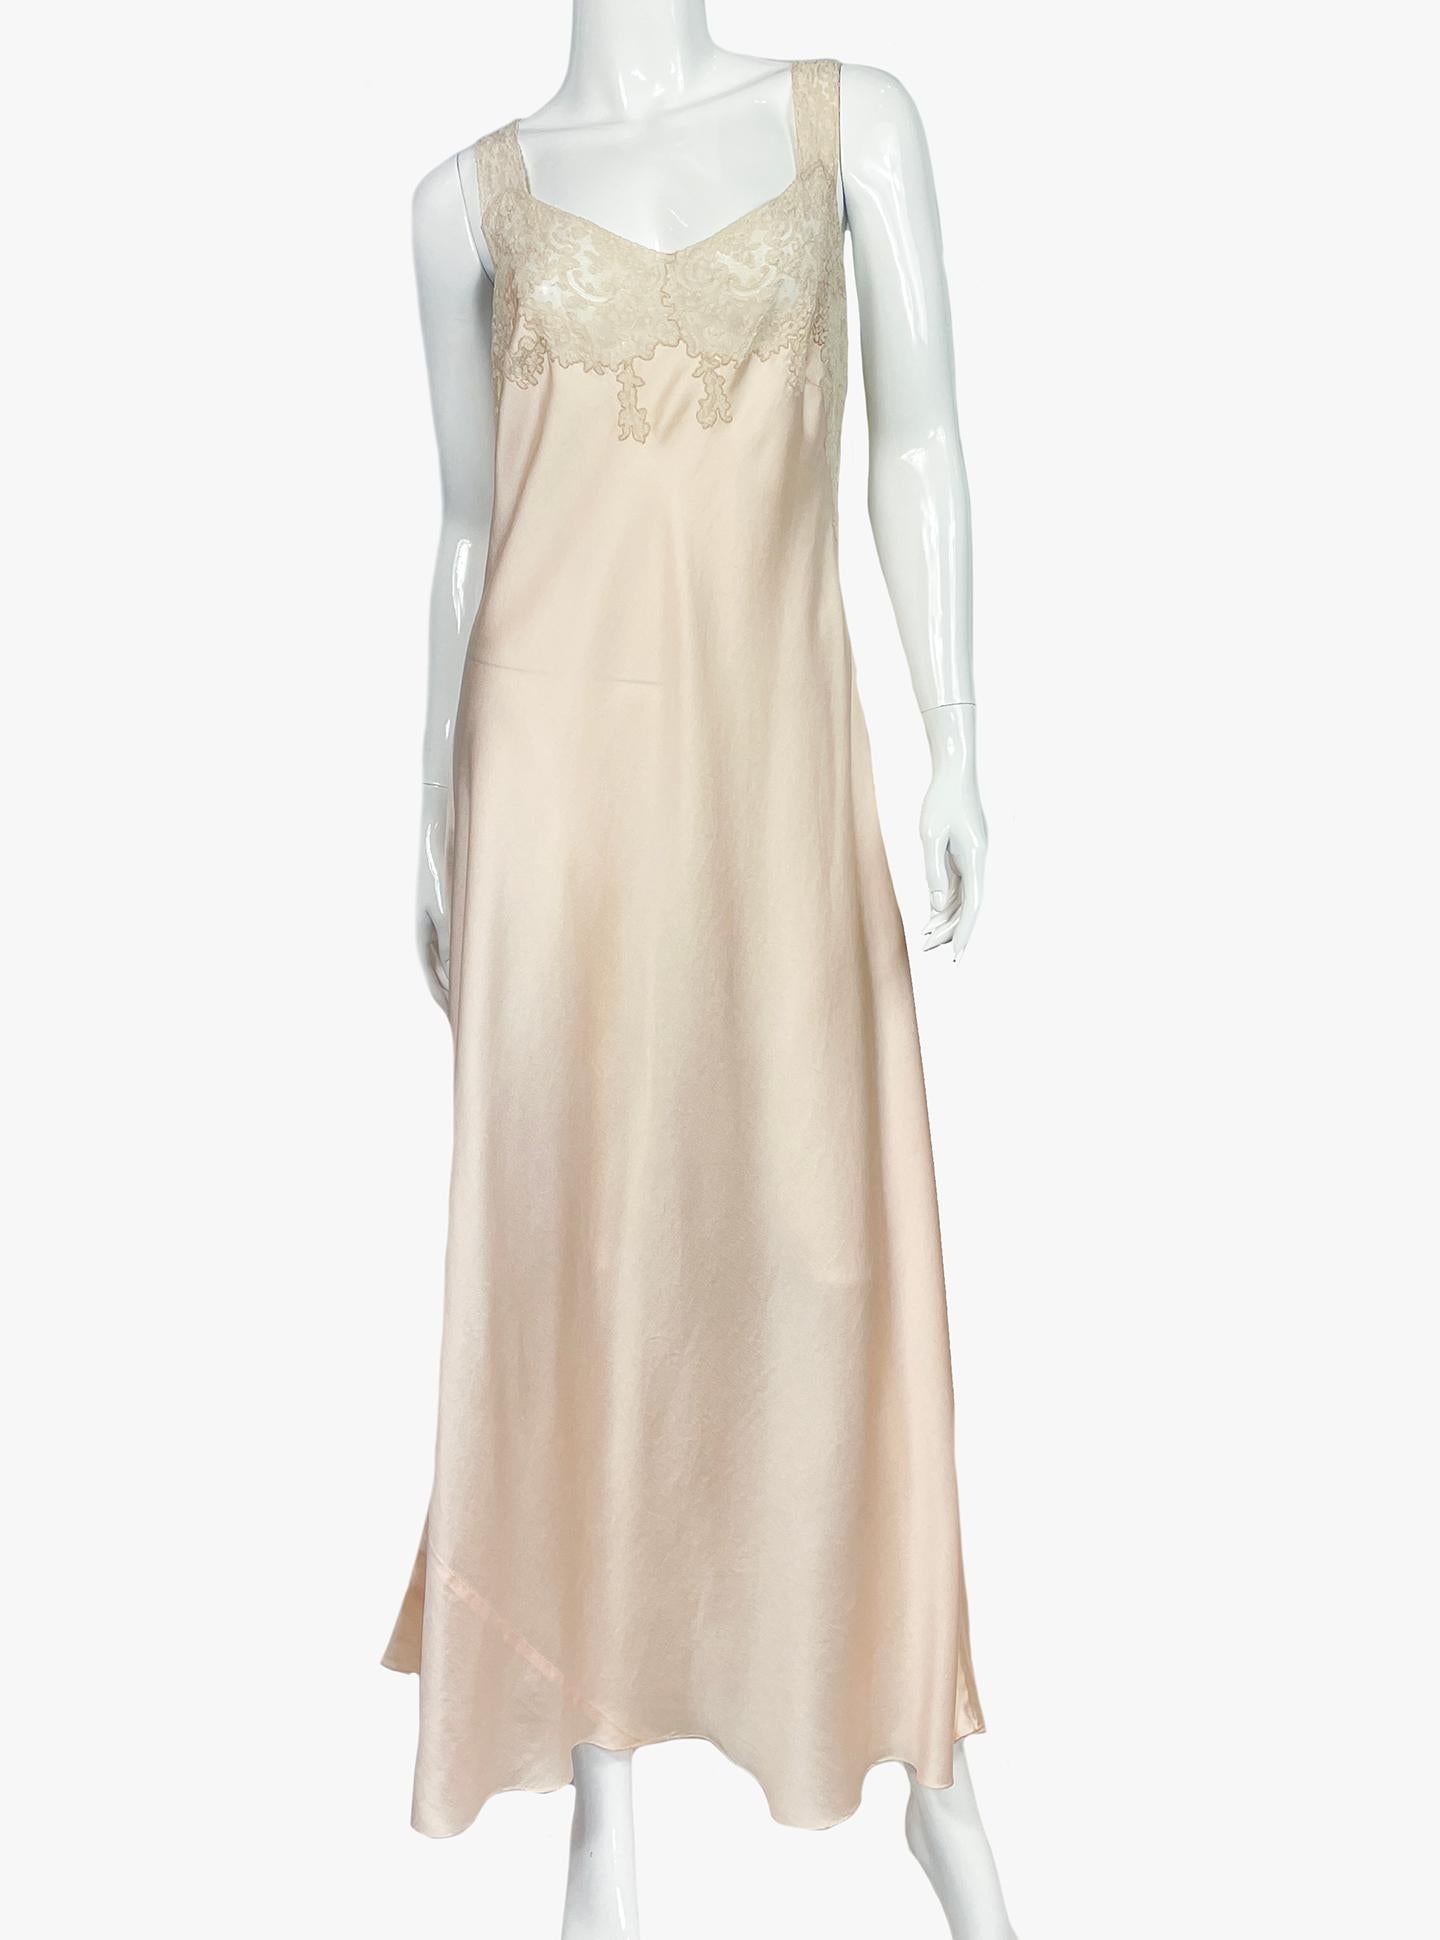 Stunning vintage silk sleep dress from the 30s.  Neckline and shoulder straps are made of the finest lace.  Soft peach silk in very good condition.

Additional information:
Size: S
Condition: Very good vintage condition. 

........Additional